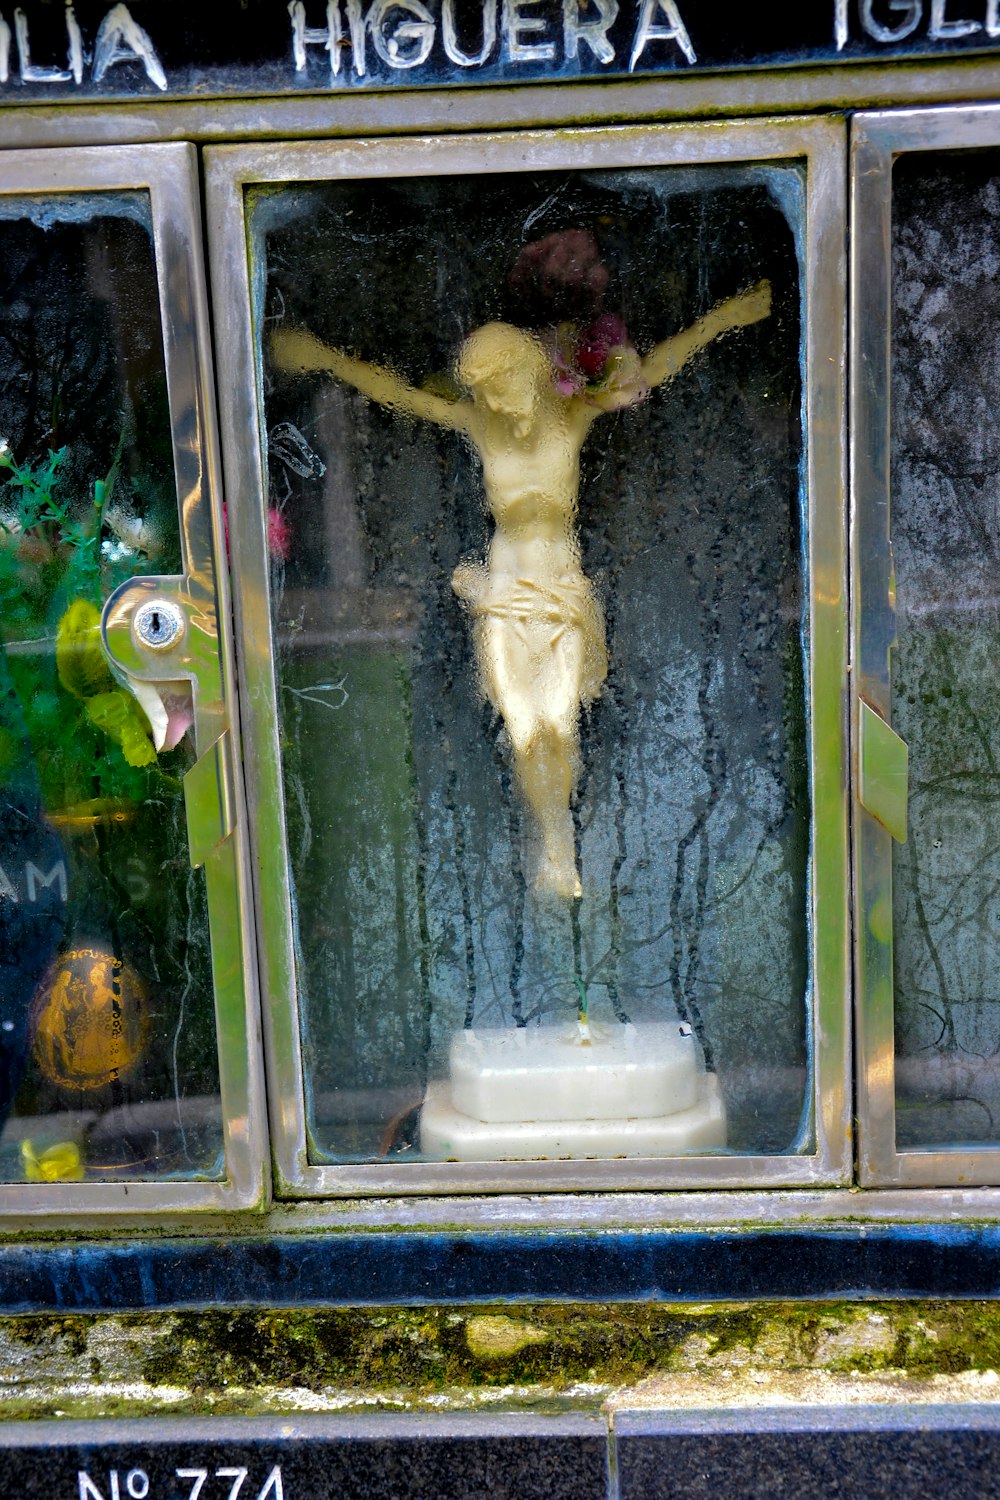 a statue of a person in a window